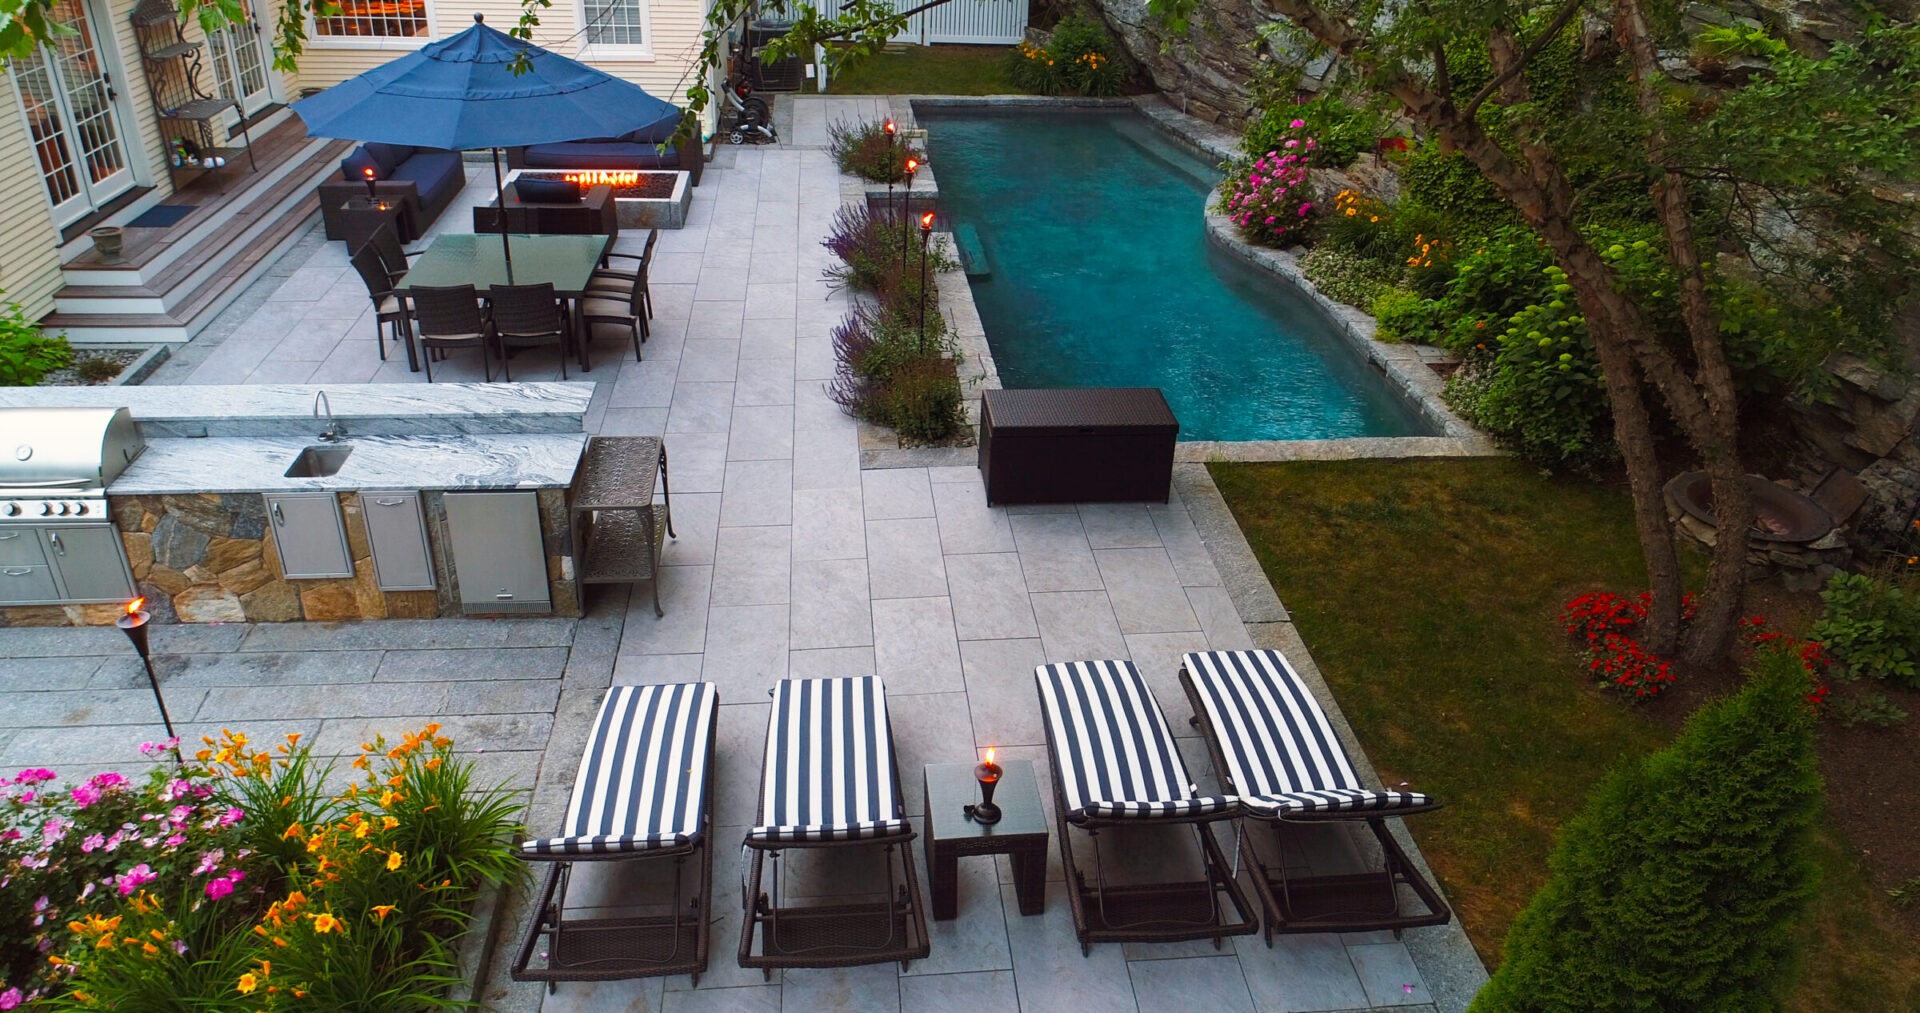 An upscale backyard with a swimming pool, patio, outdoor kitchen, dining area, lounge chairs, vibrant flowers, and lush greenery in a serene setting.